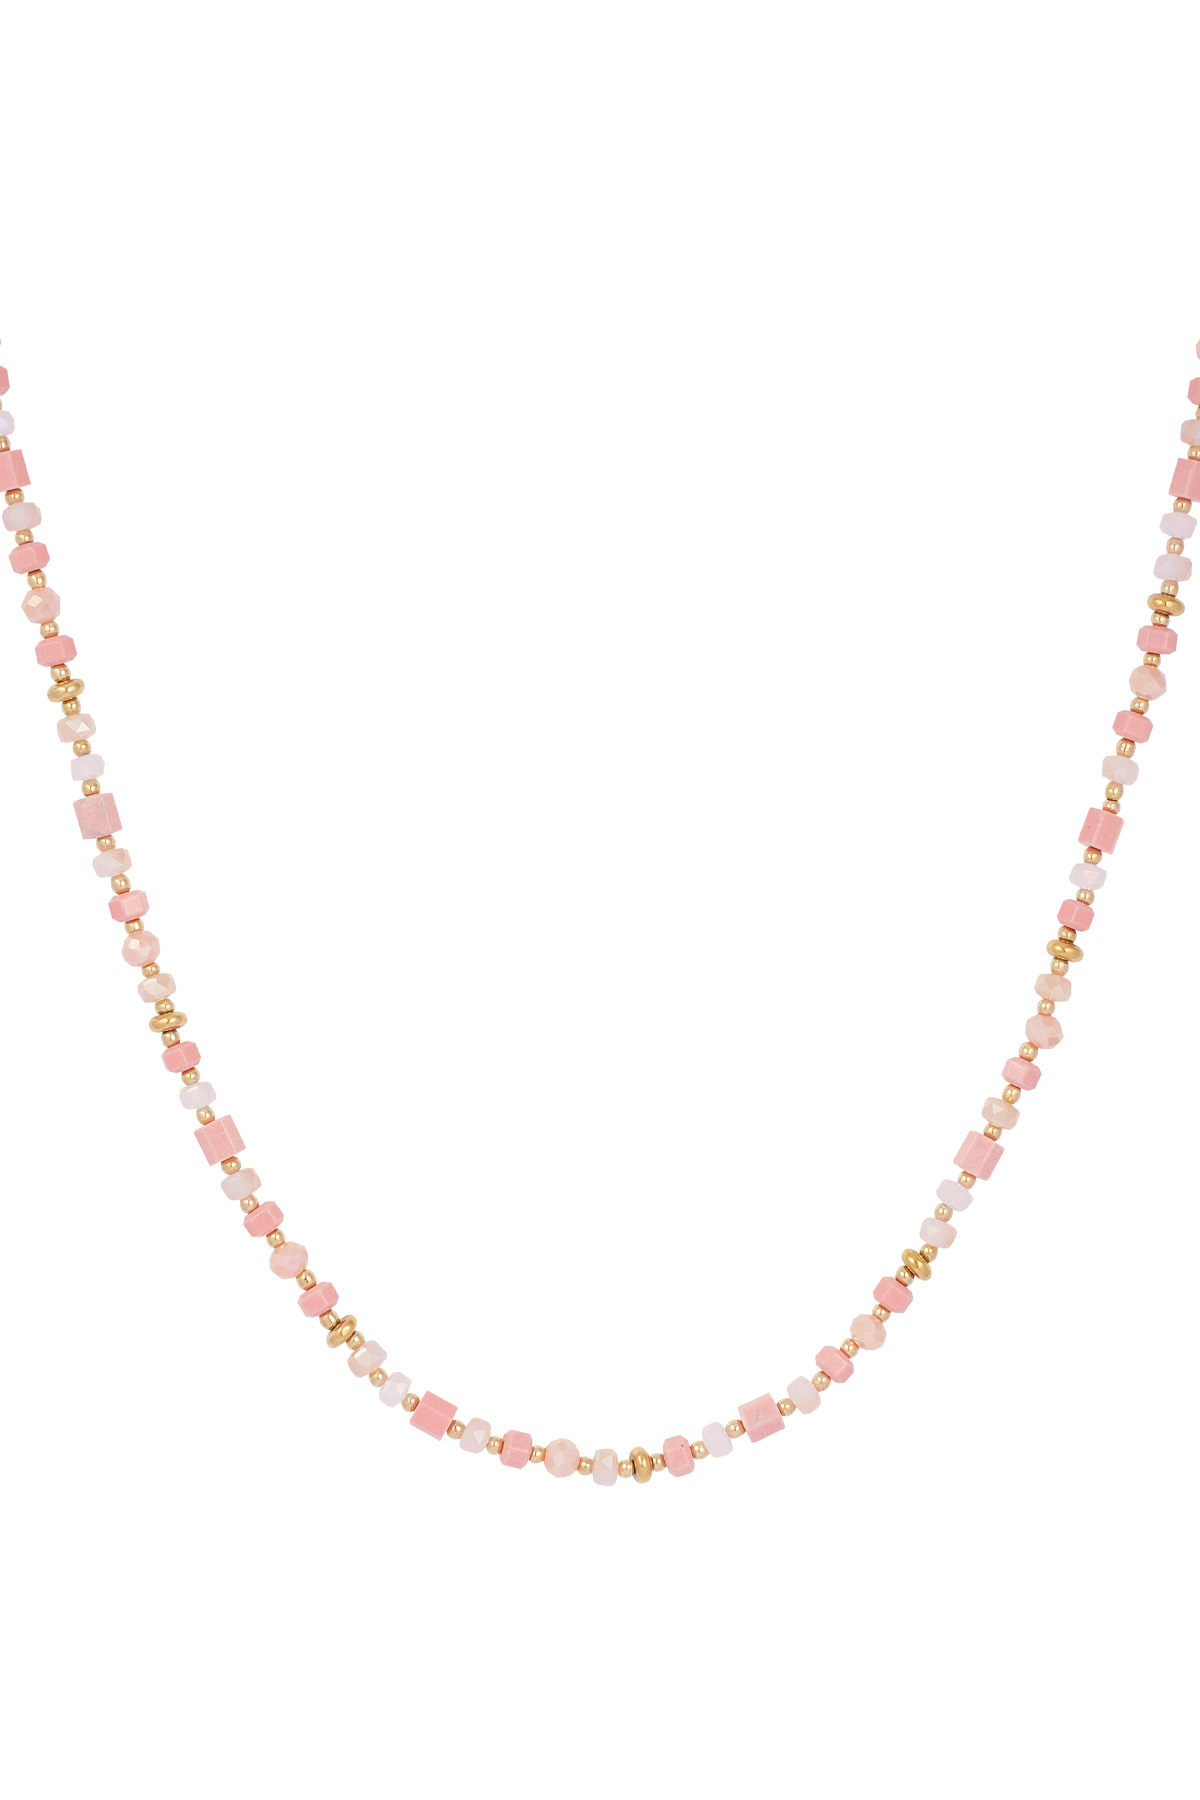 Colorful festival necklace - pink/gold 